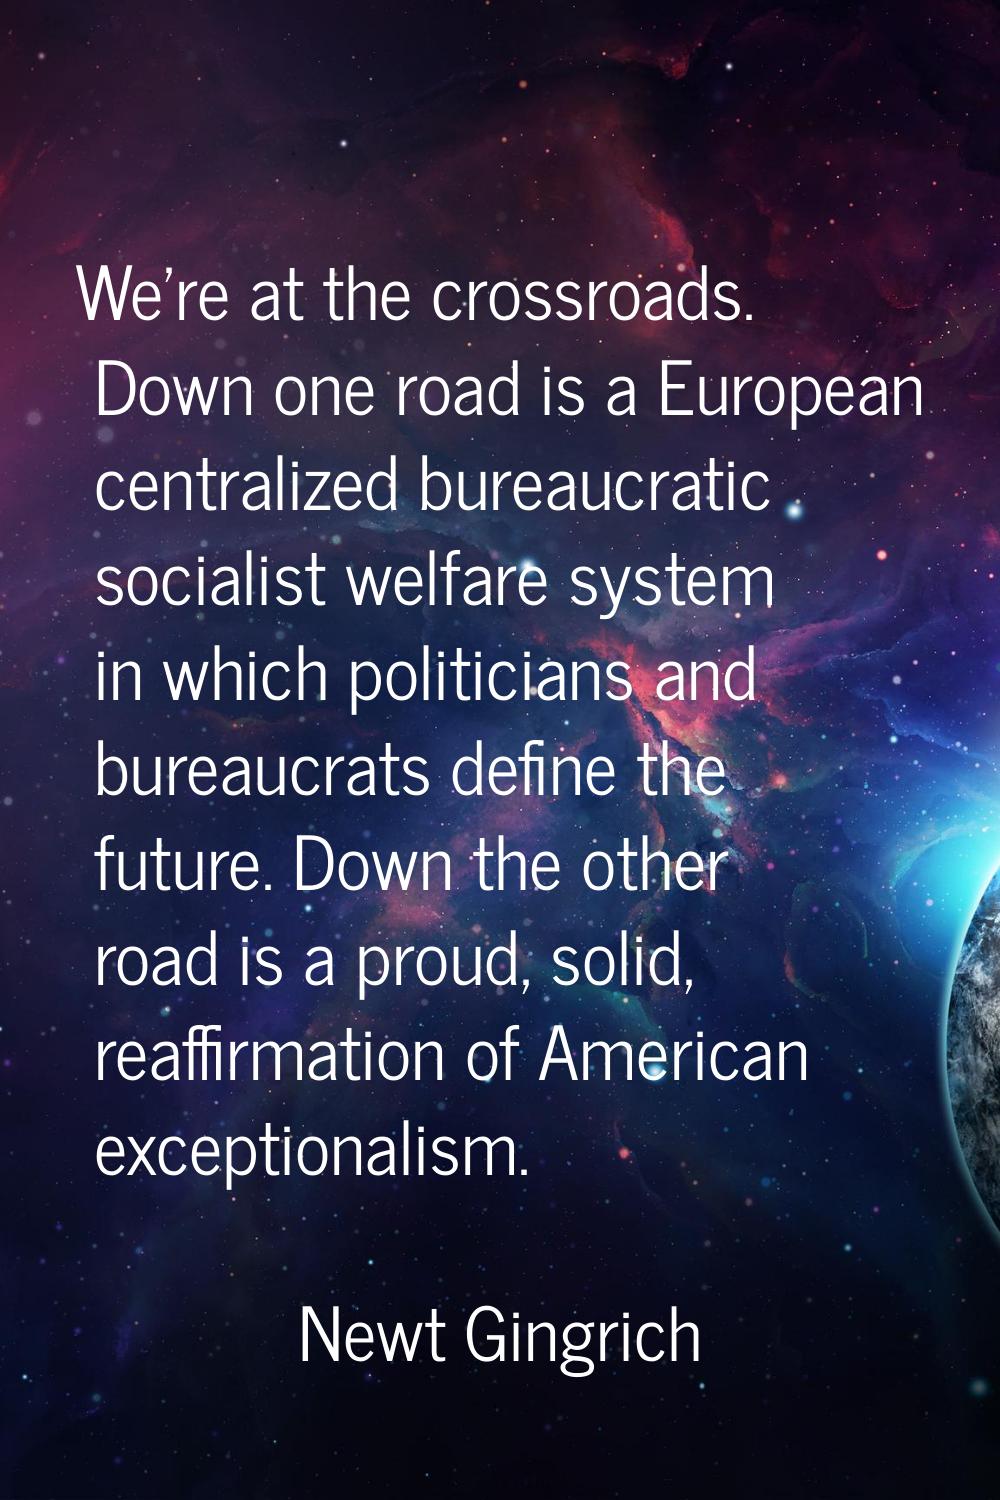 We're at the crossroads. Down one road is a European centralized bureaucratic socialist welfare sys